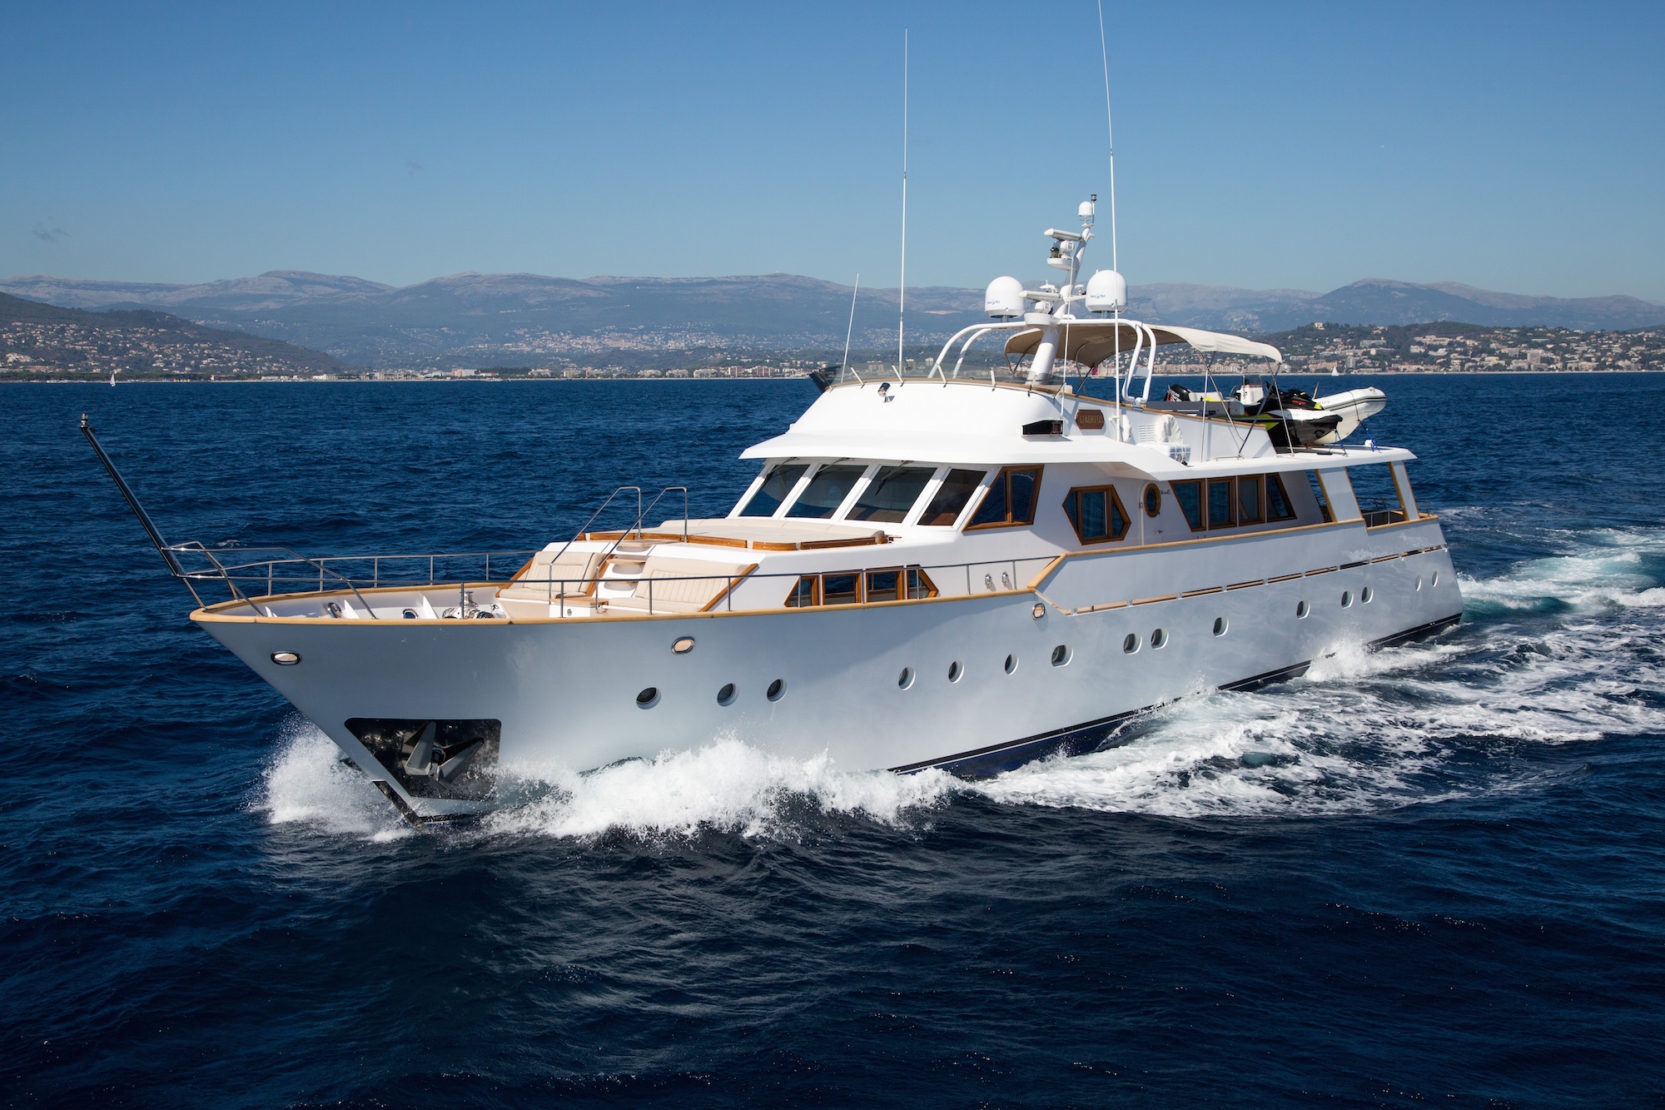 Luxury Yacht to purchase on Neo Yatching's website.